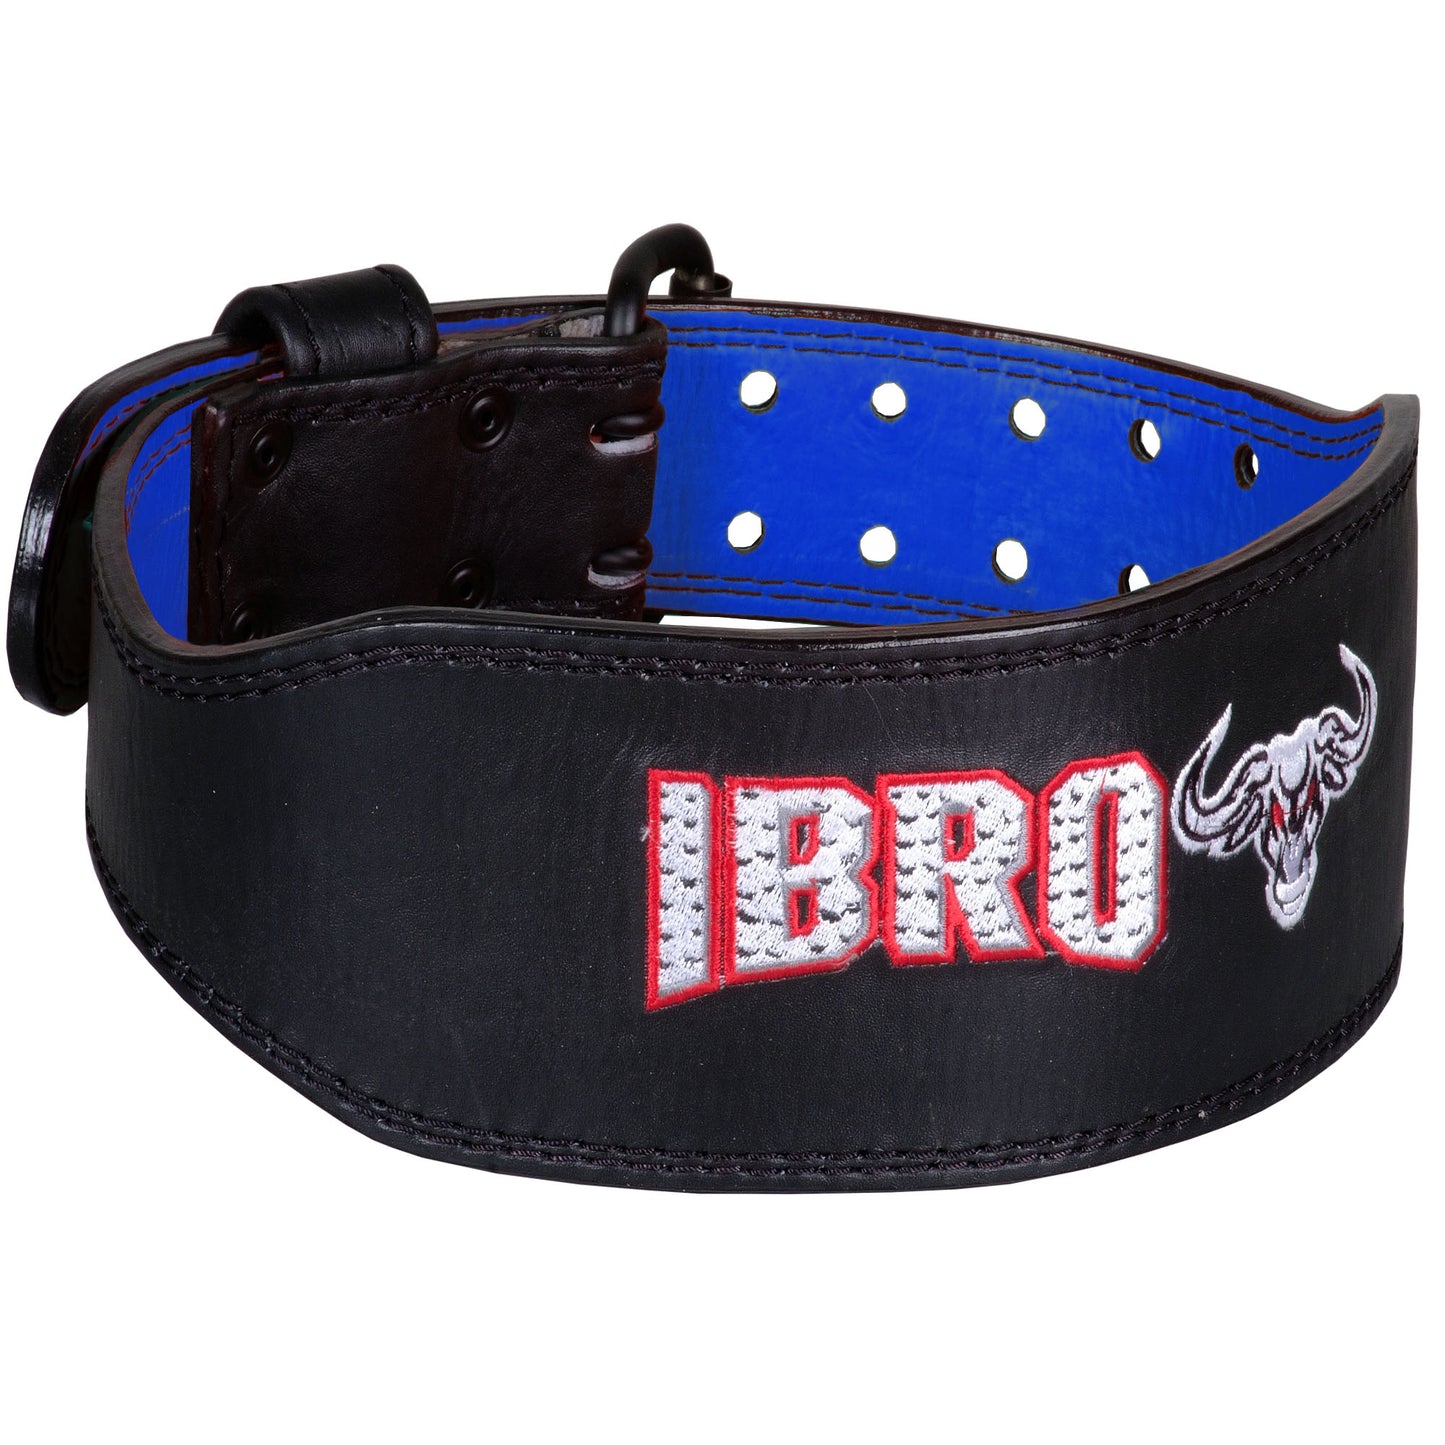 IBRO Premium Aniline 7MM Leather Weight Lifting Belt for Men Squats Deadlift Strength Training Bodybuilding Heavy Duty Steel Roller Buckle Comfortable Weightlifting Padded Lower Back Support BlackBlue